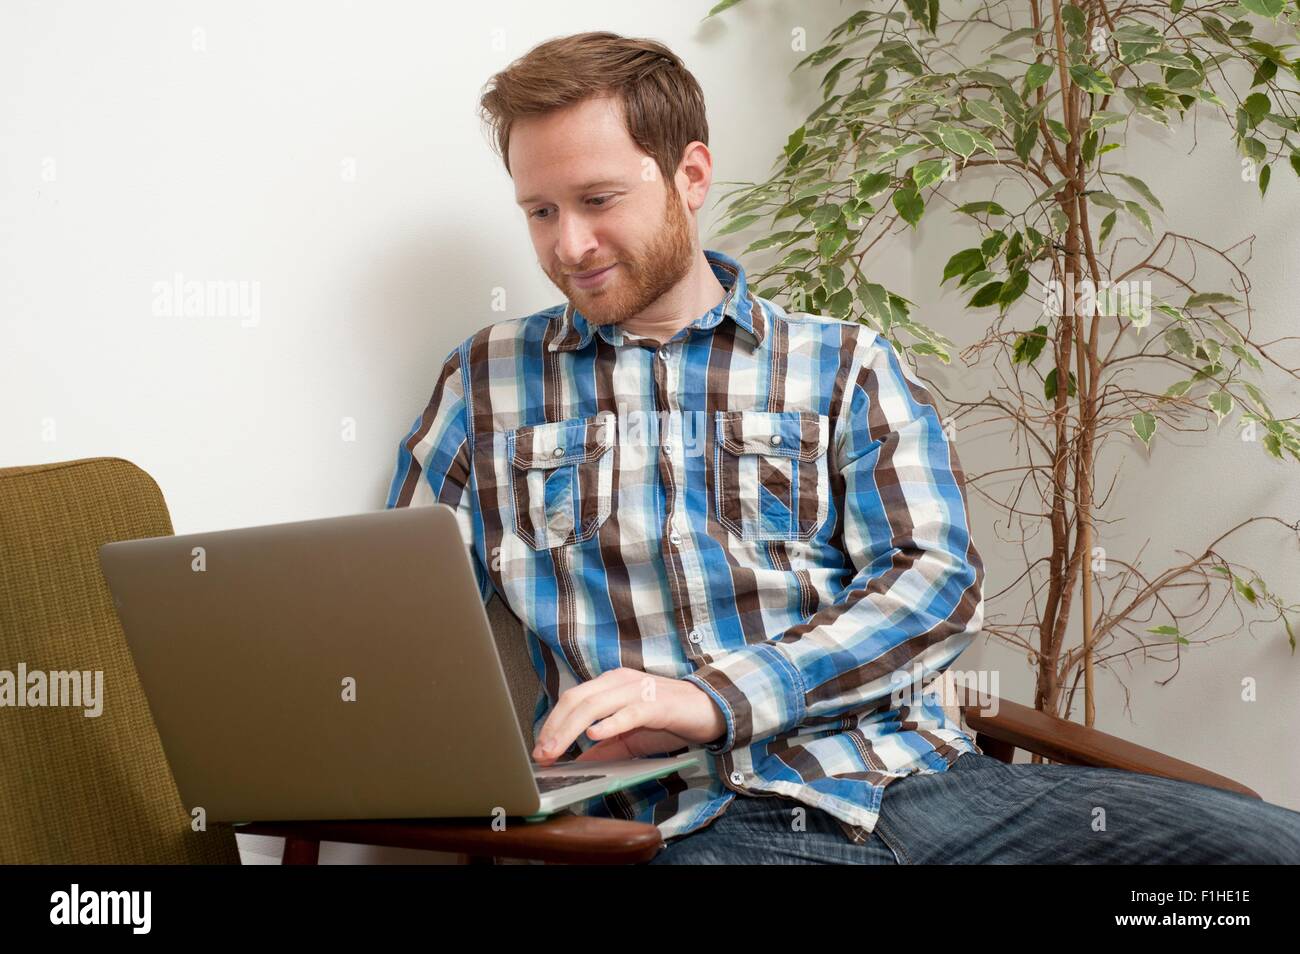 Male customer typing on laptop in style cafe Stock Photo